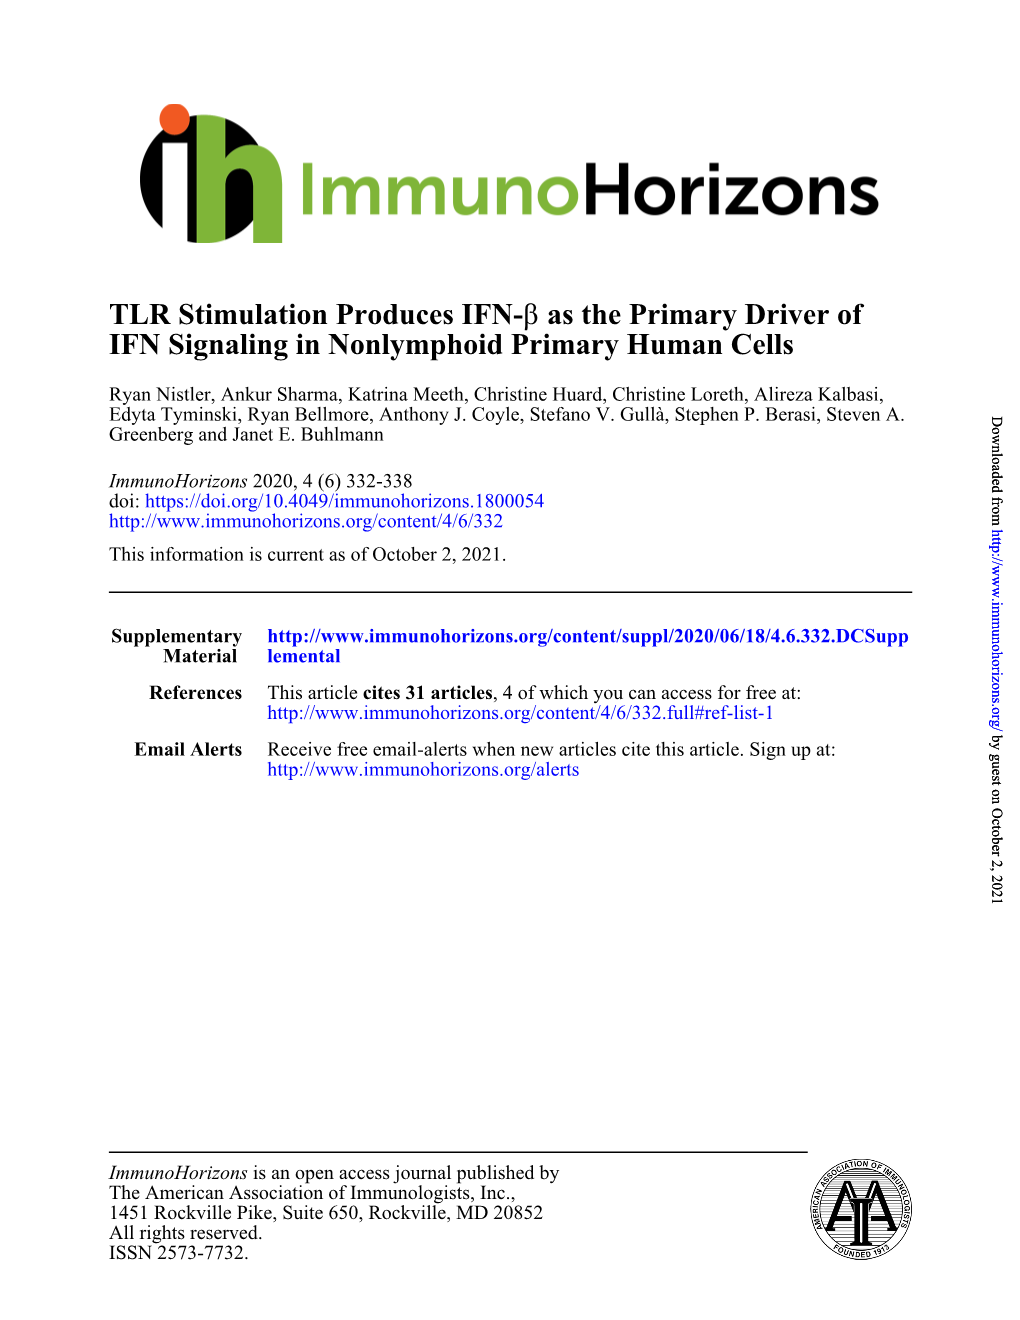 IFN Signaling in Nonlymphoid Primary Human Cells As the Primary Driver of Β TLR Stimulation Produces IFN